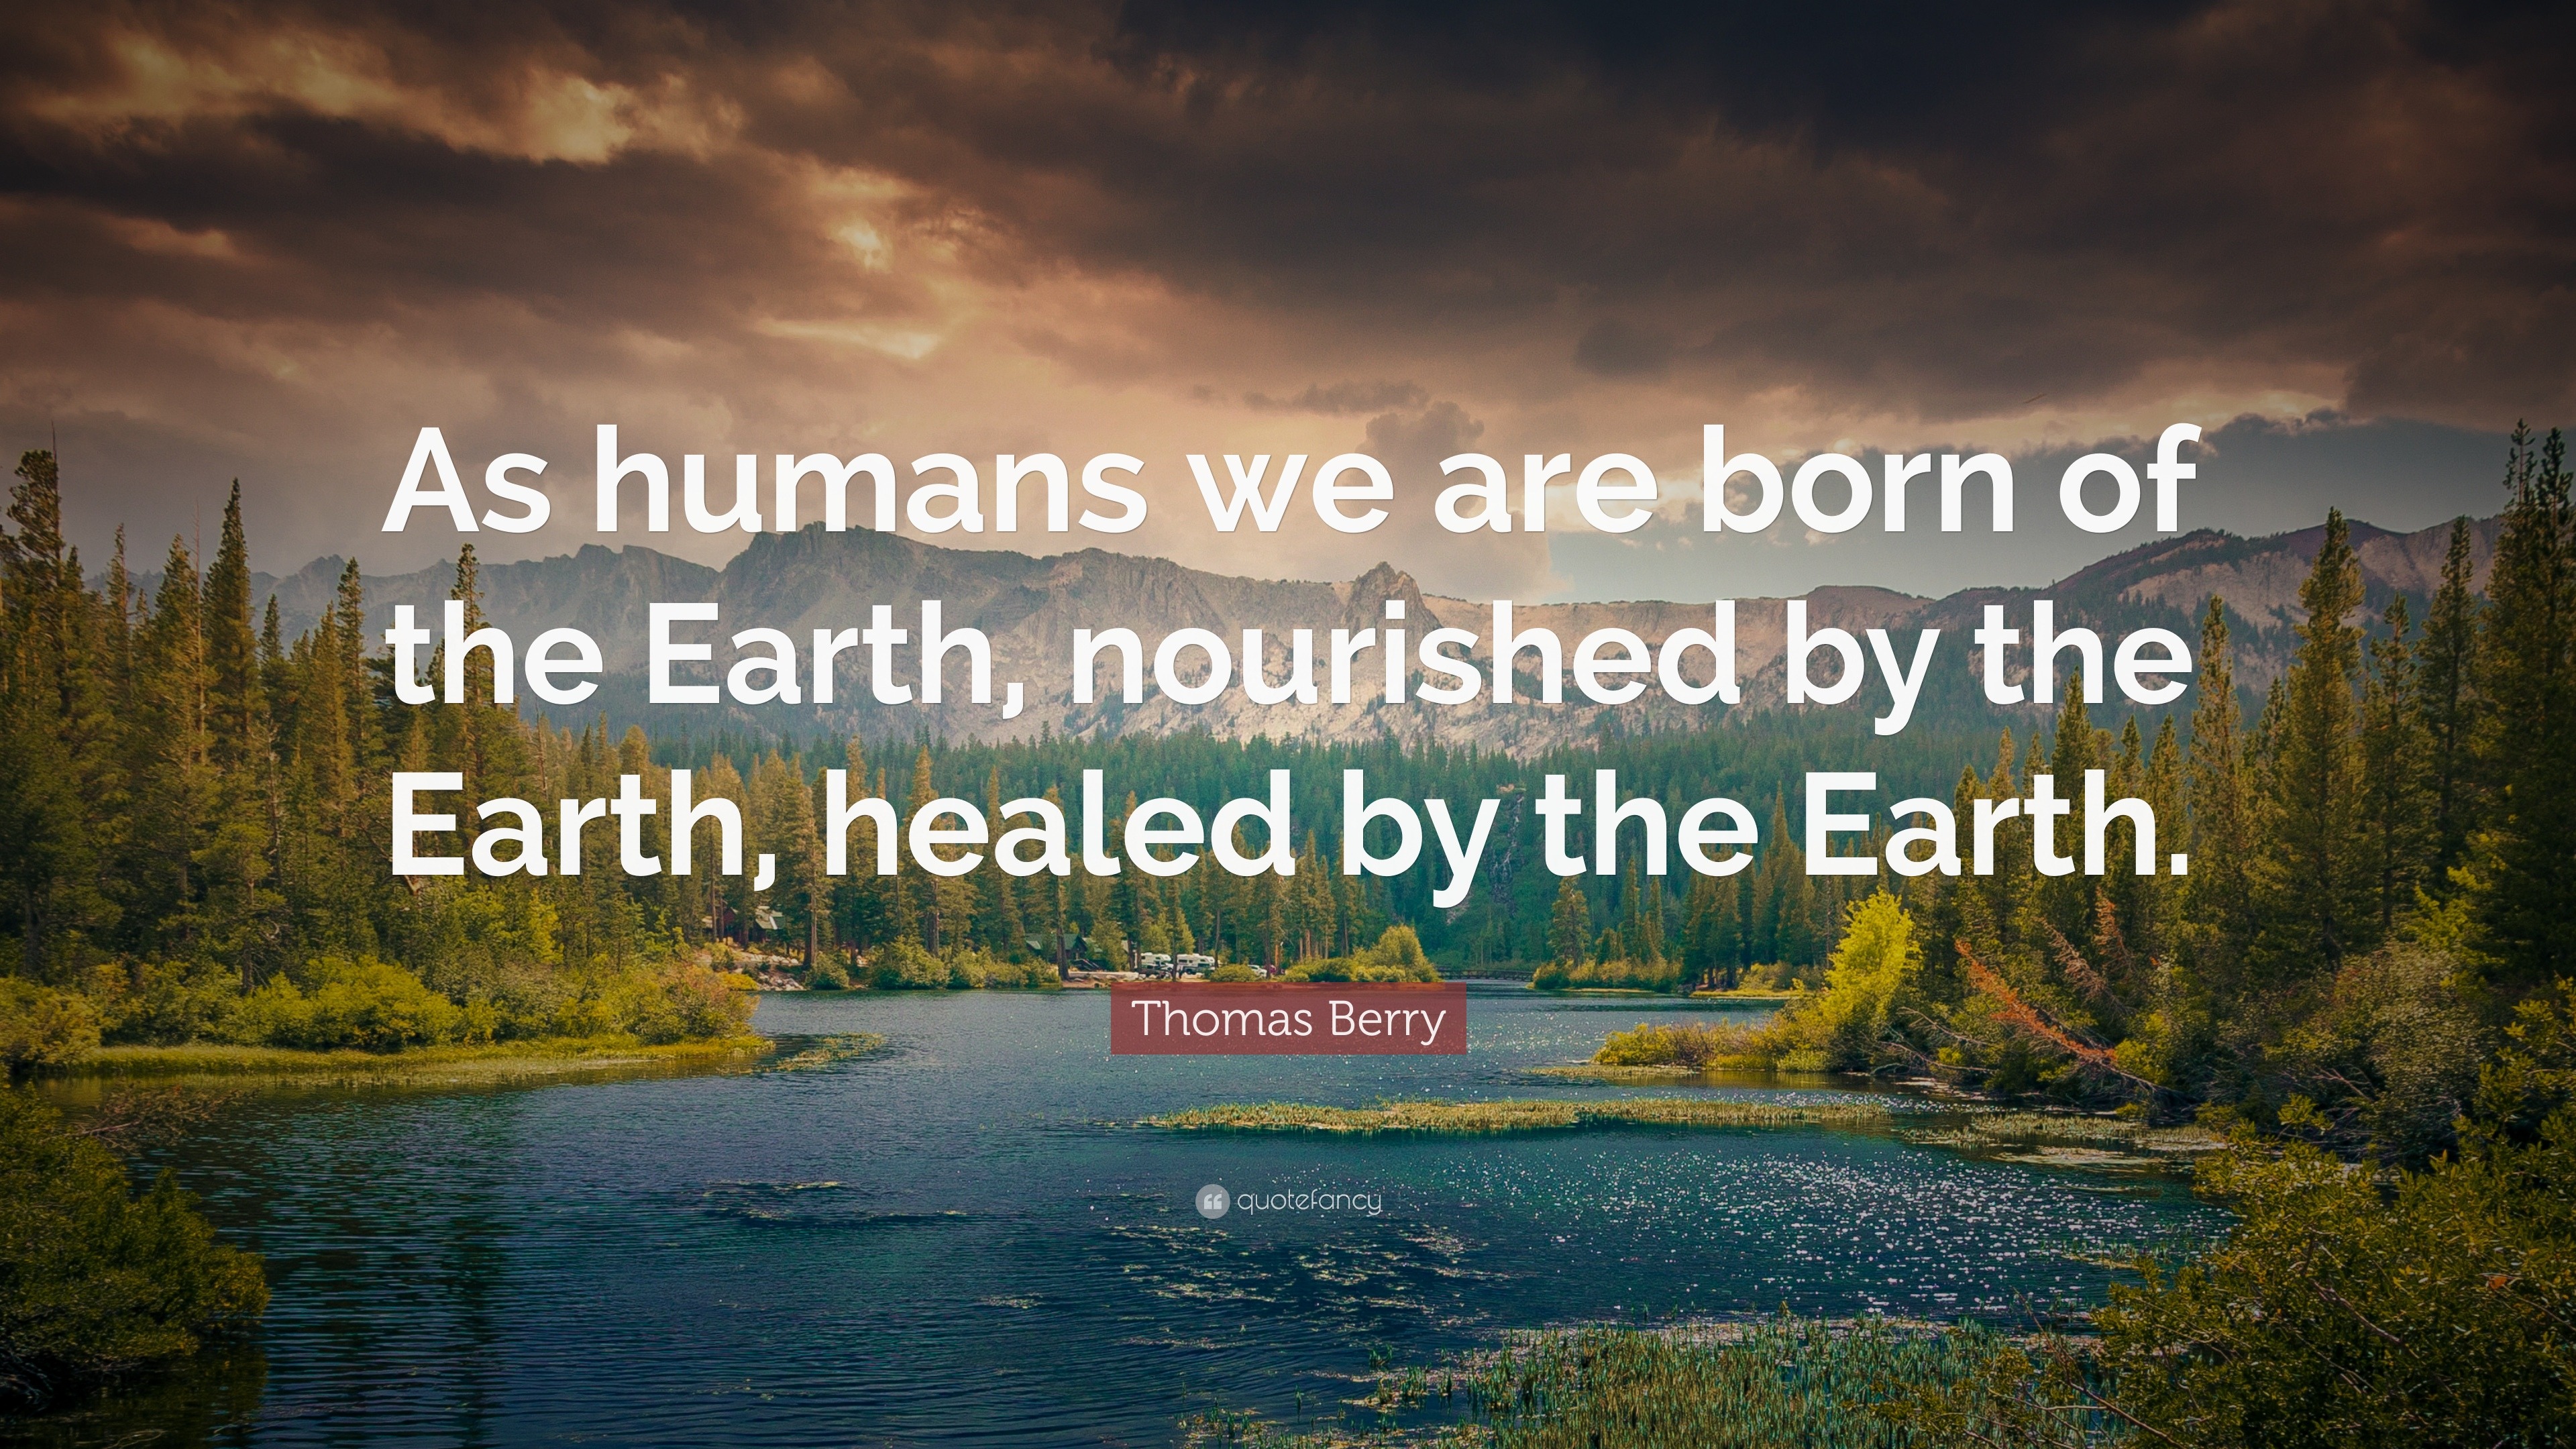 “As humans we are born of the Earth, nourished by the Earth, healed by the Earth.”